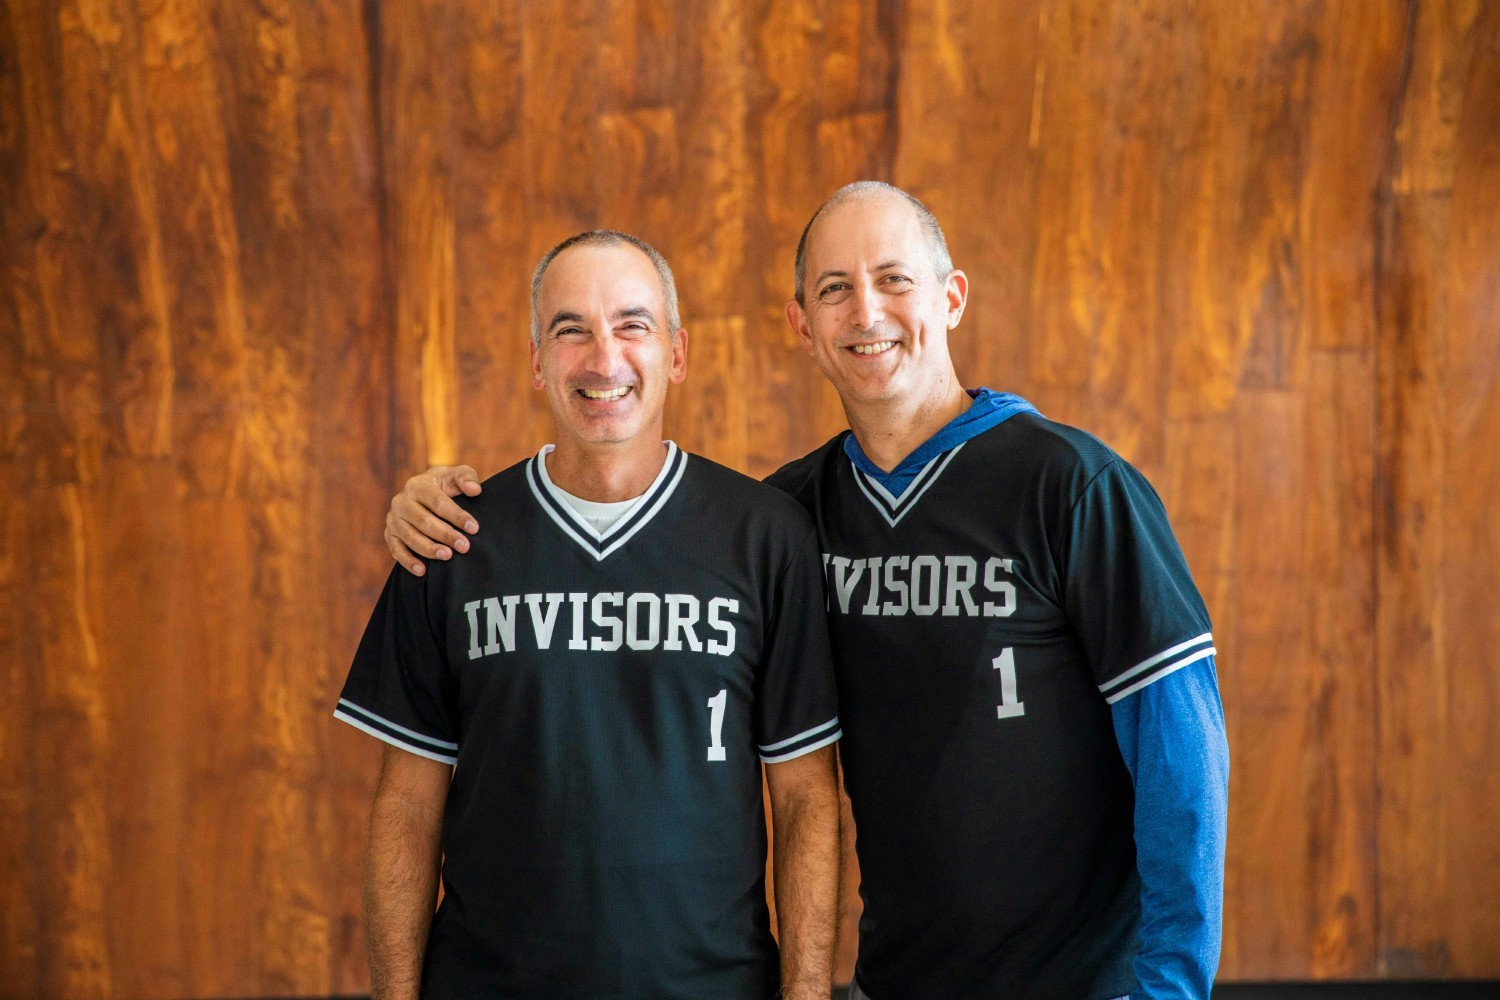 Invisors founders Keith Diego + Will Hardy